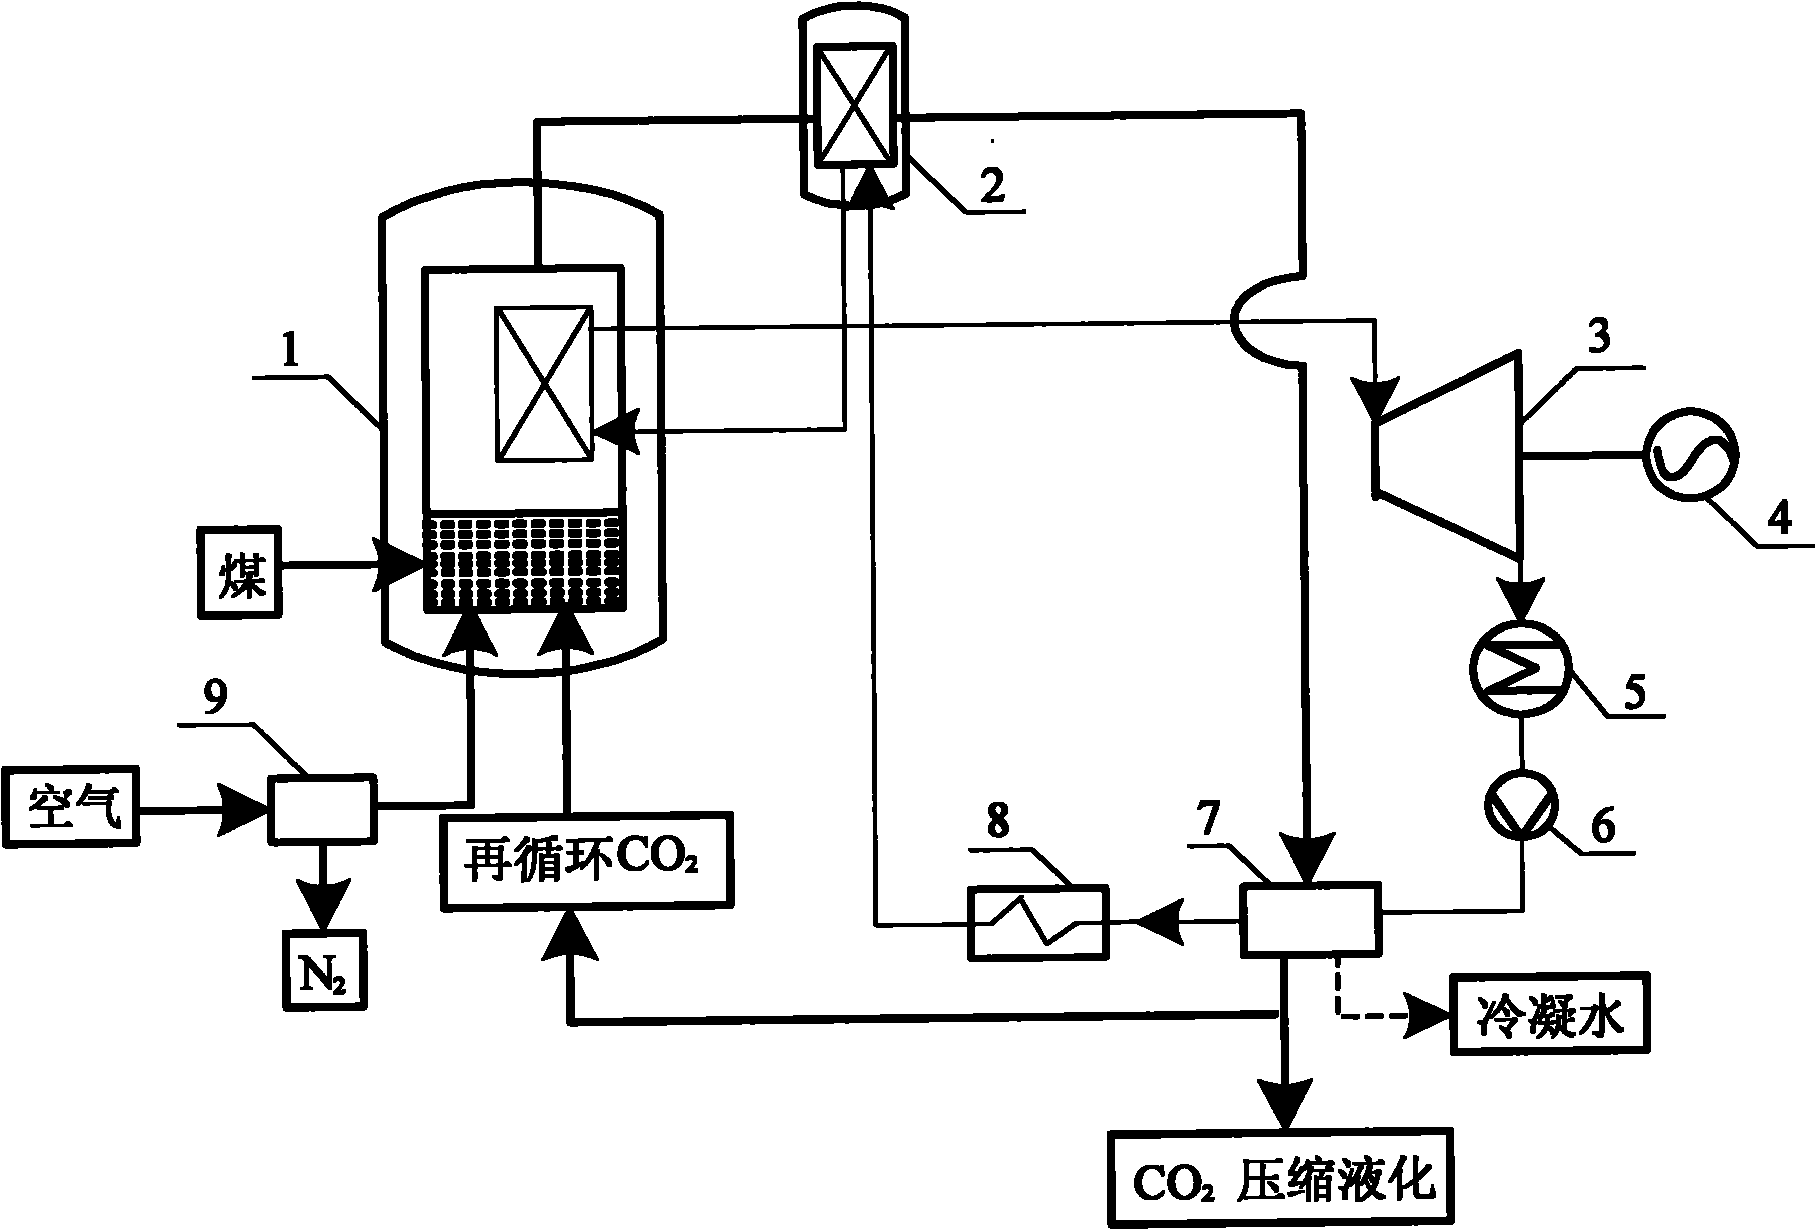 Reclaiming system for condensation heat of flue gas during pressurized oxy-coal combustion